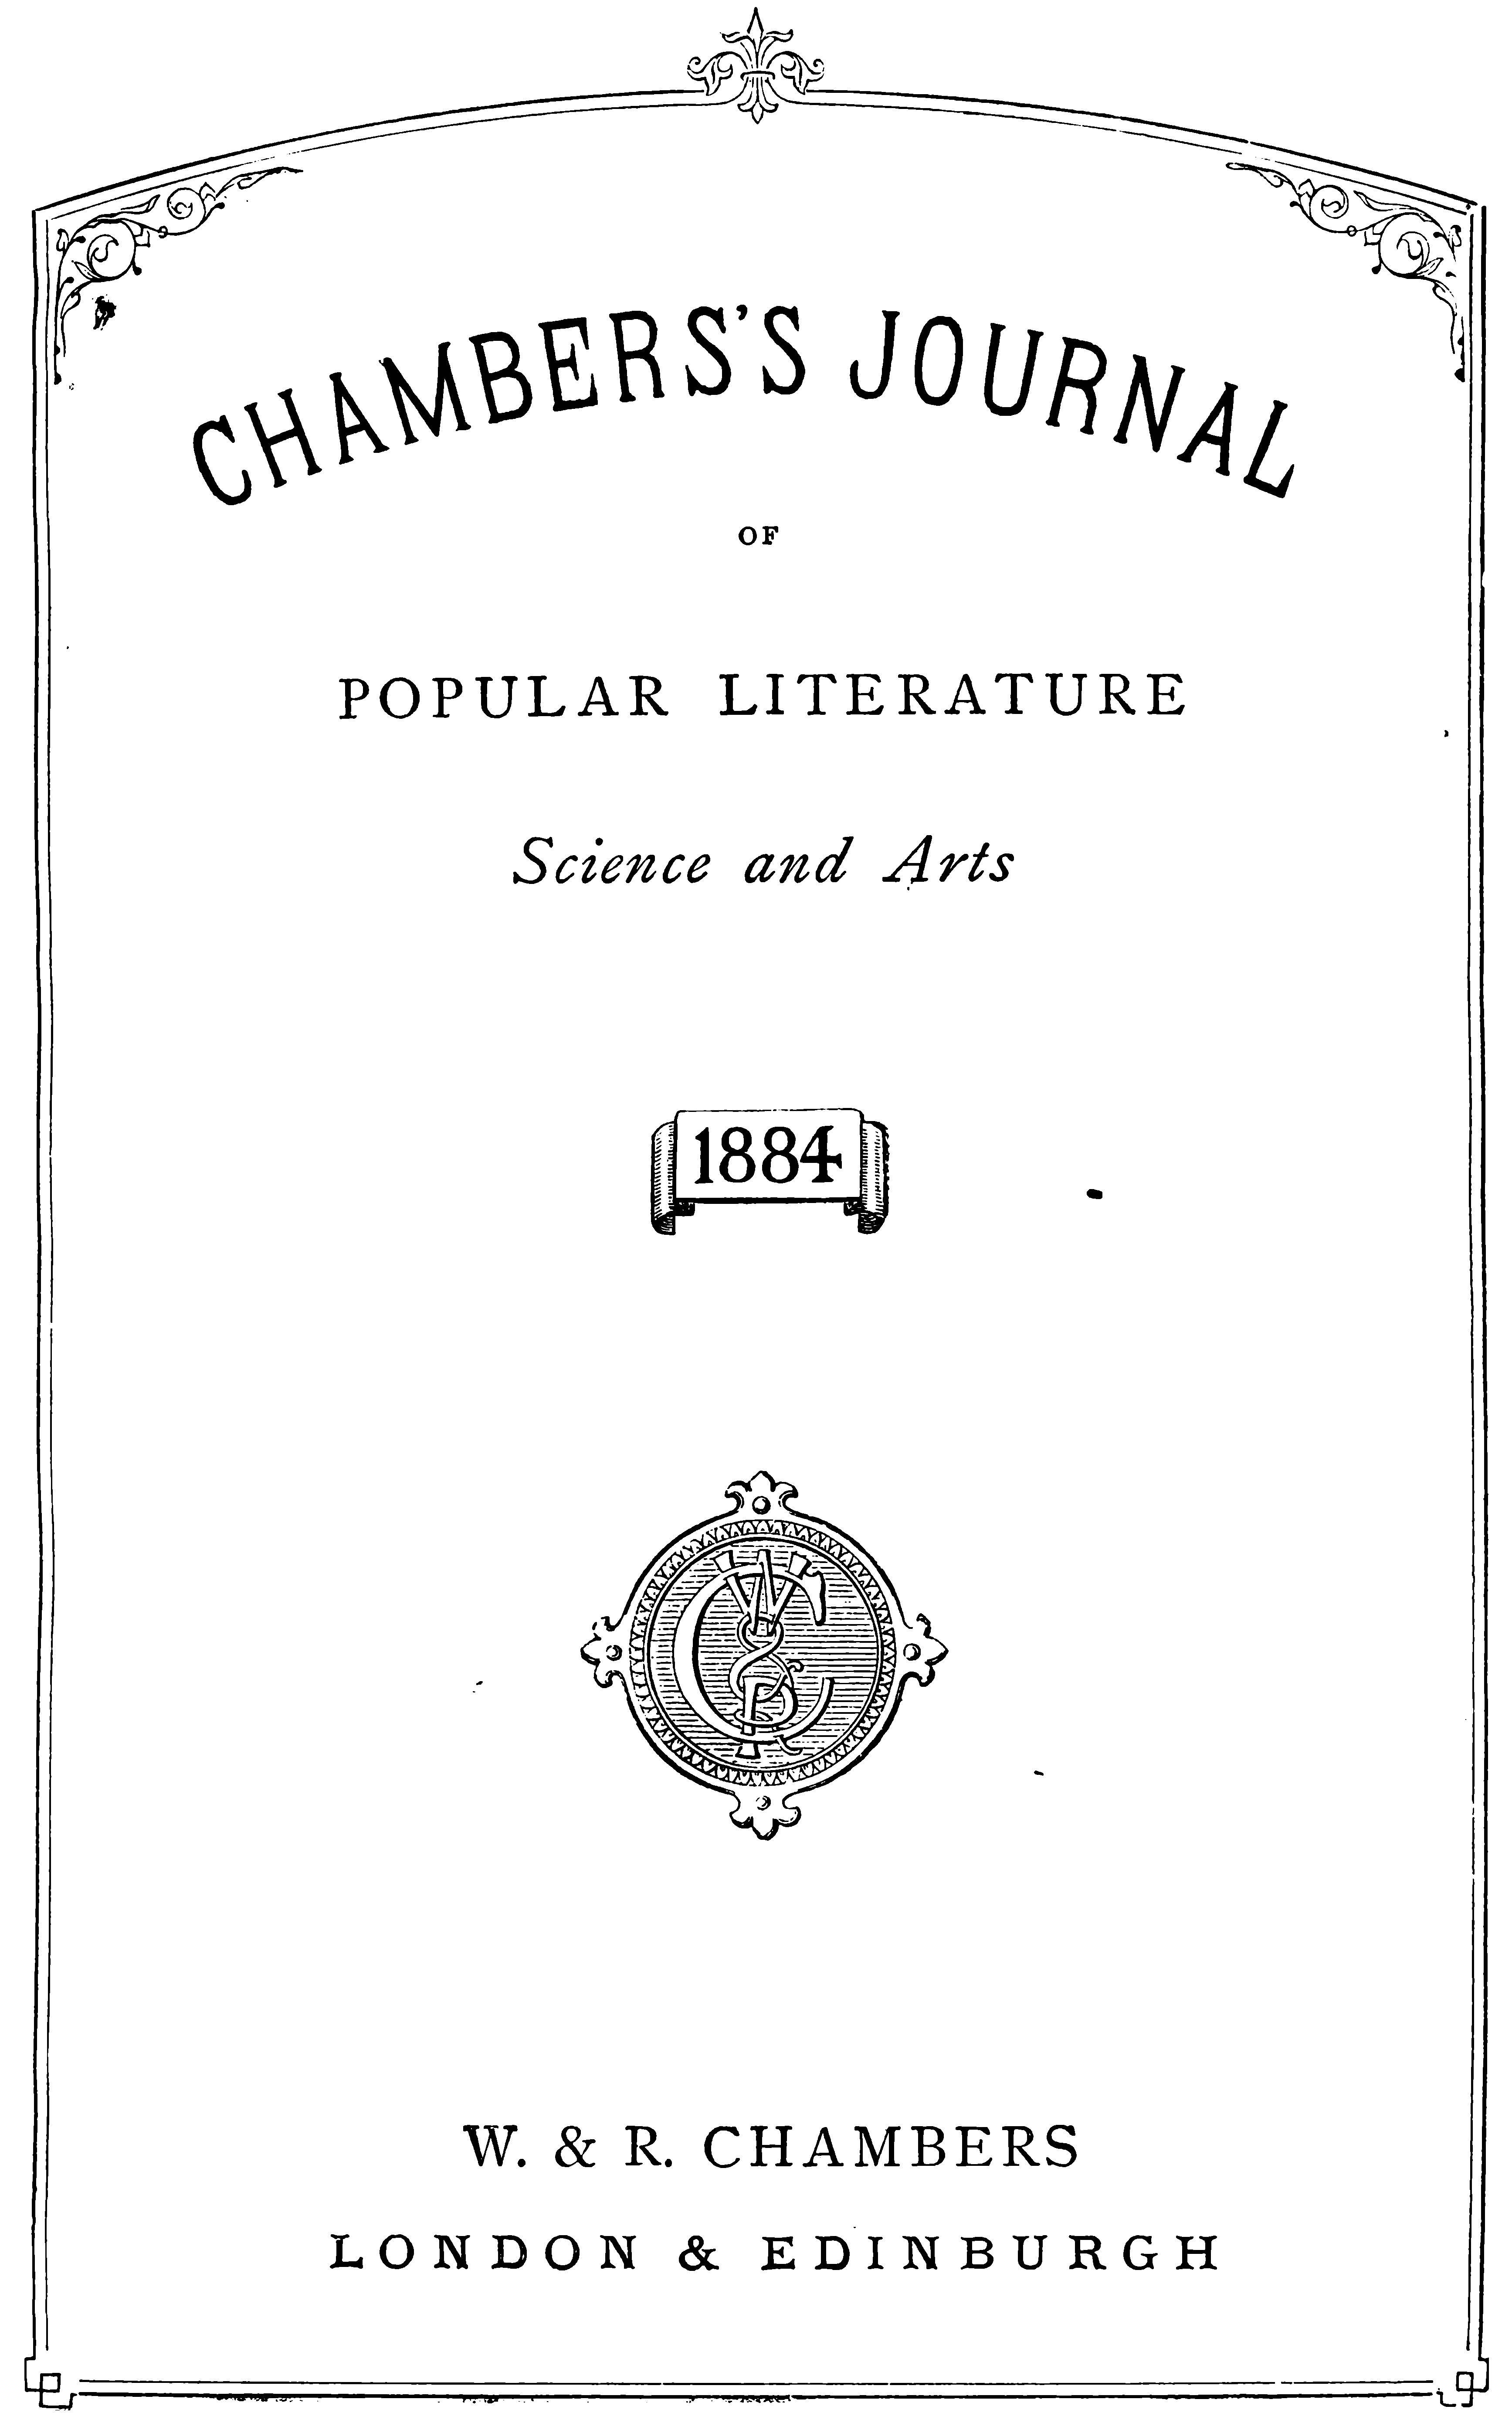 CHAMBERS’S JOURNAL OF POPULAR LITERATURE SCIENCE AND ARTS.